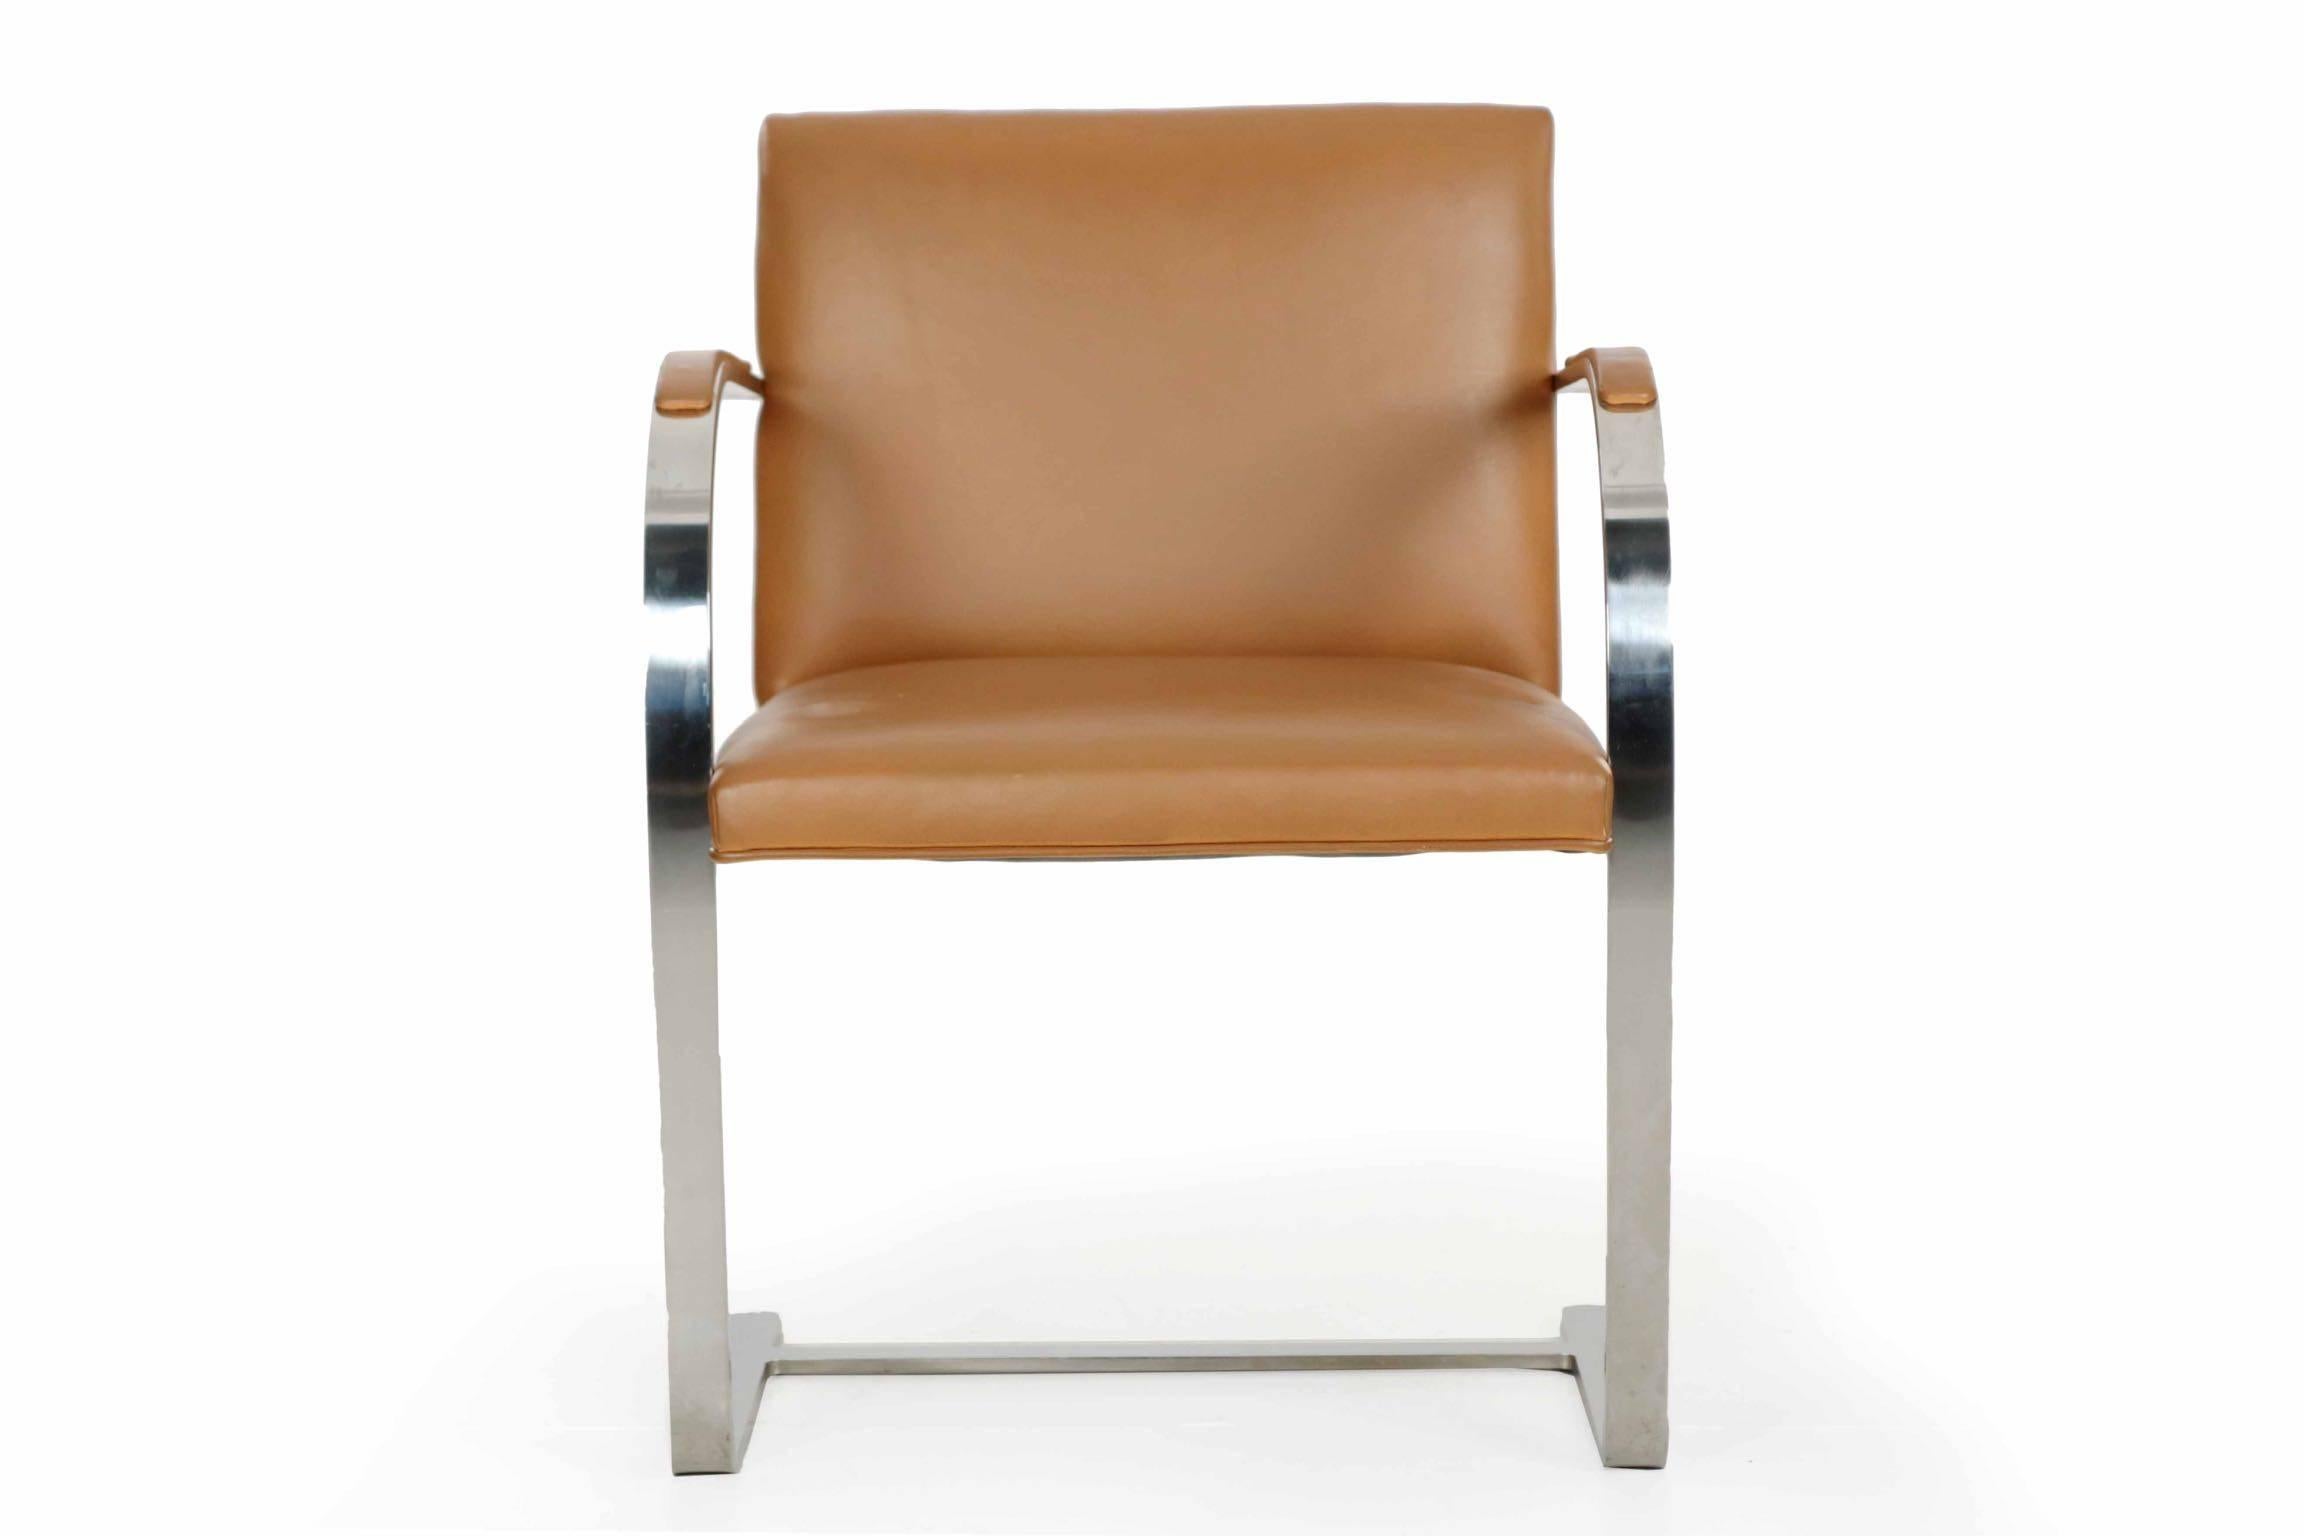 An iconic and very finely fabricated chair, this BRNO flat bar armchair was designed by Ludwig Mies van der Rohe and manufactured by Knoll in stainless steel. The chair is stamped KP underneath the flat feet for Knoll Productions. It is expertly